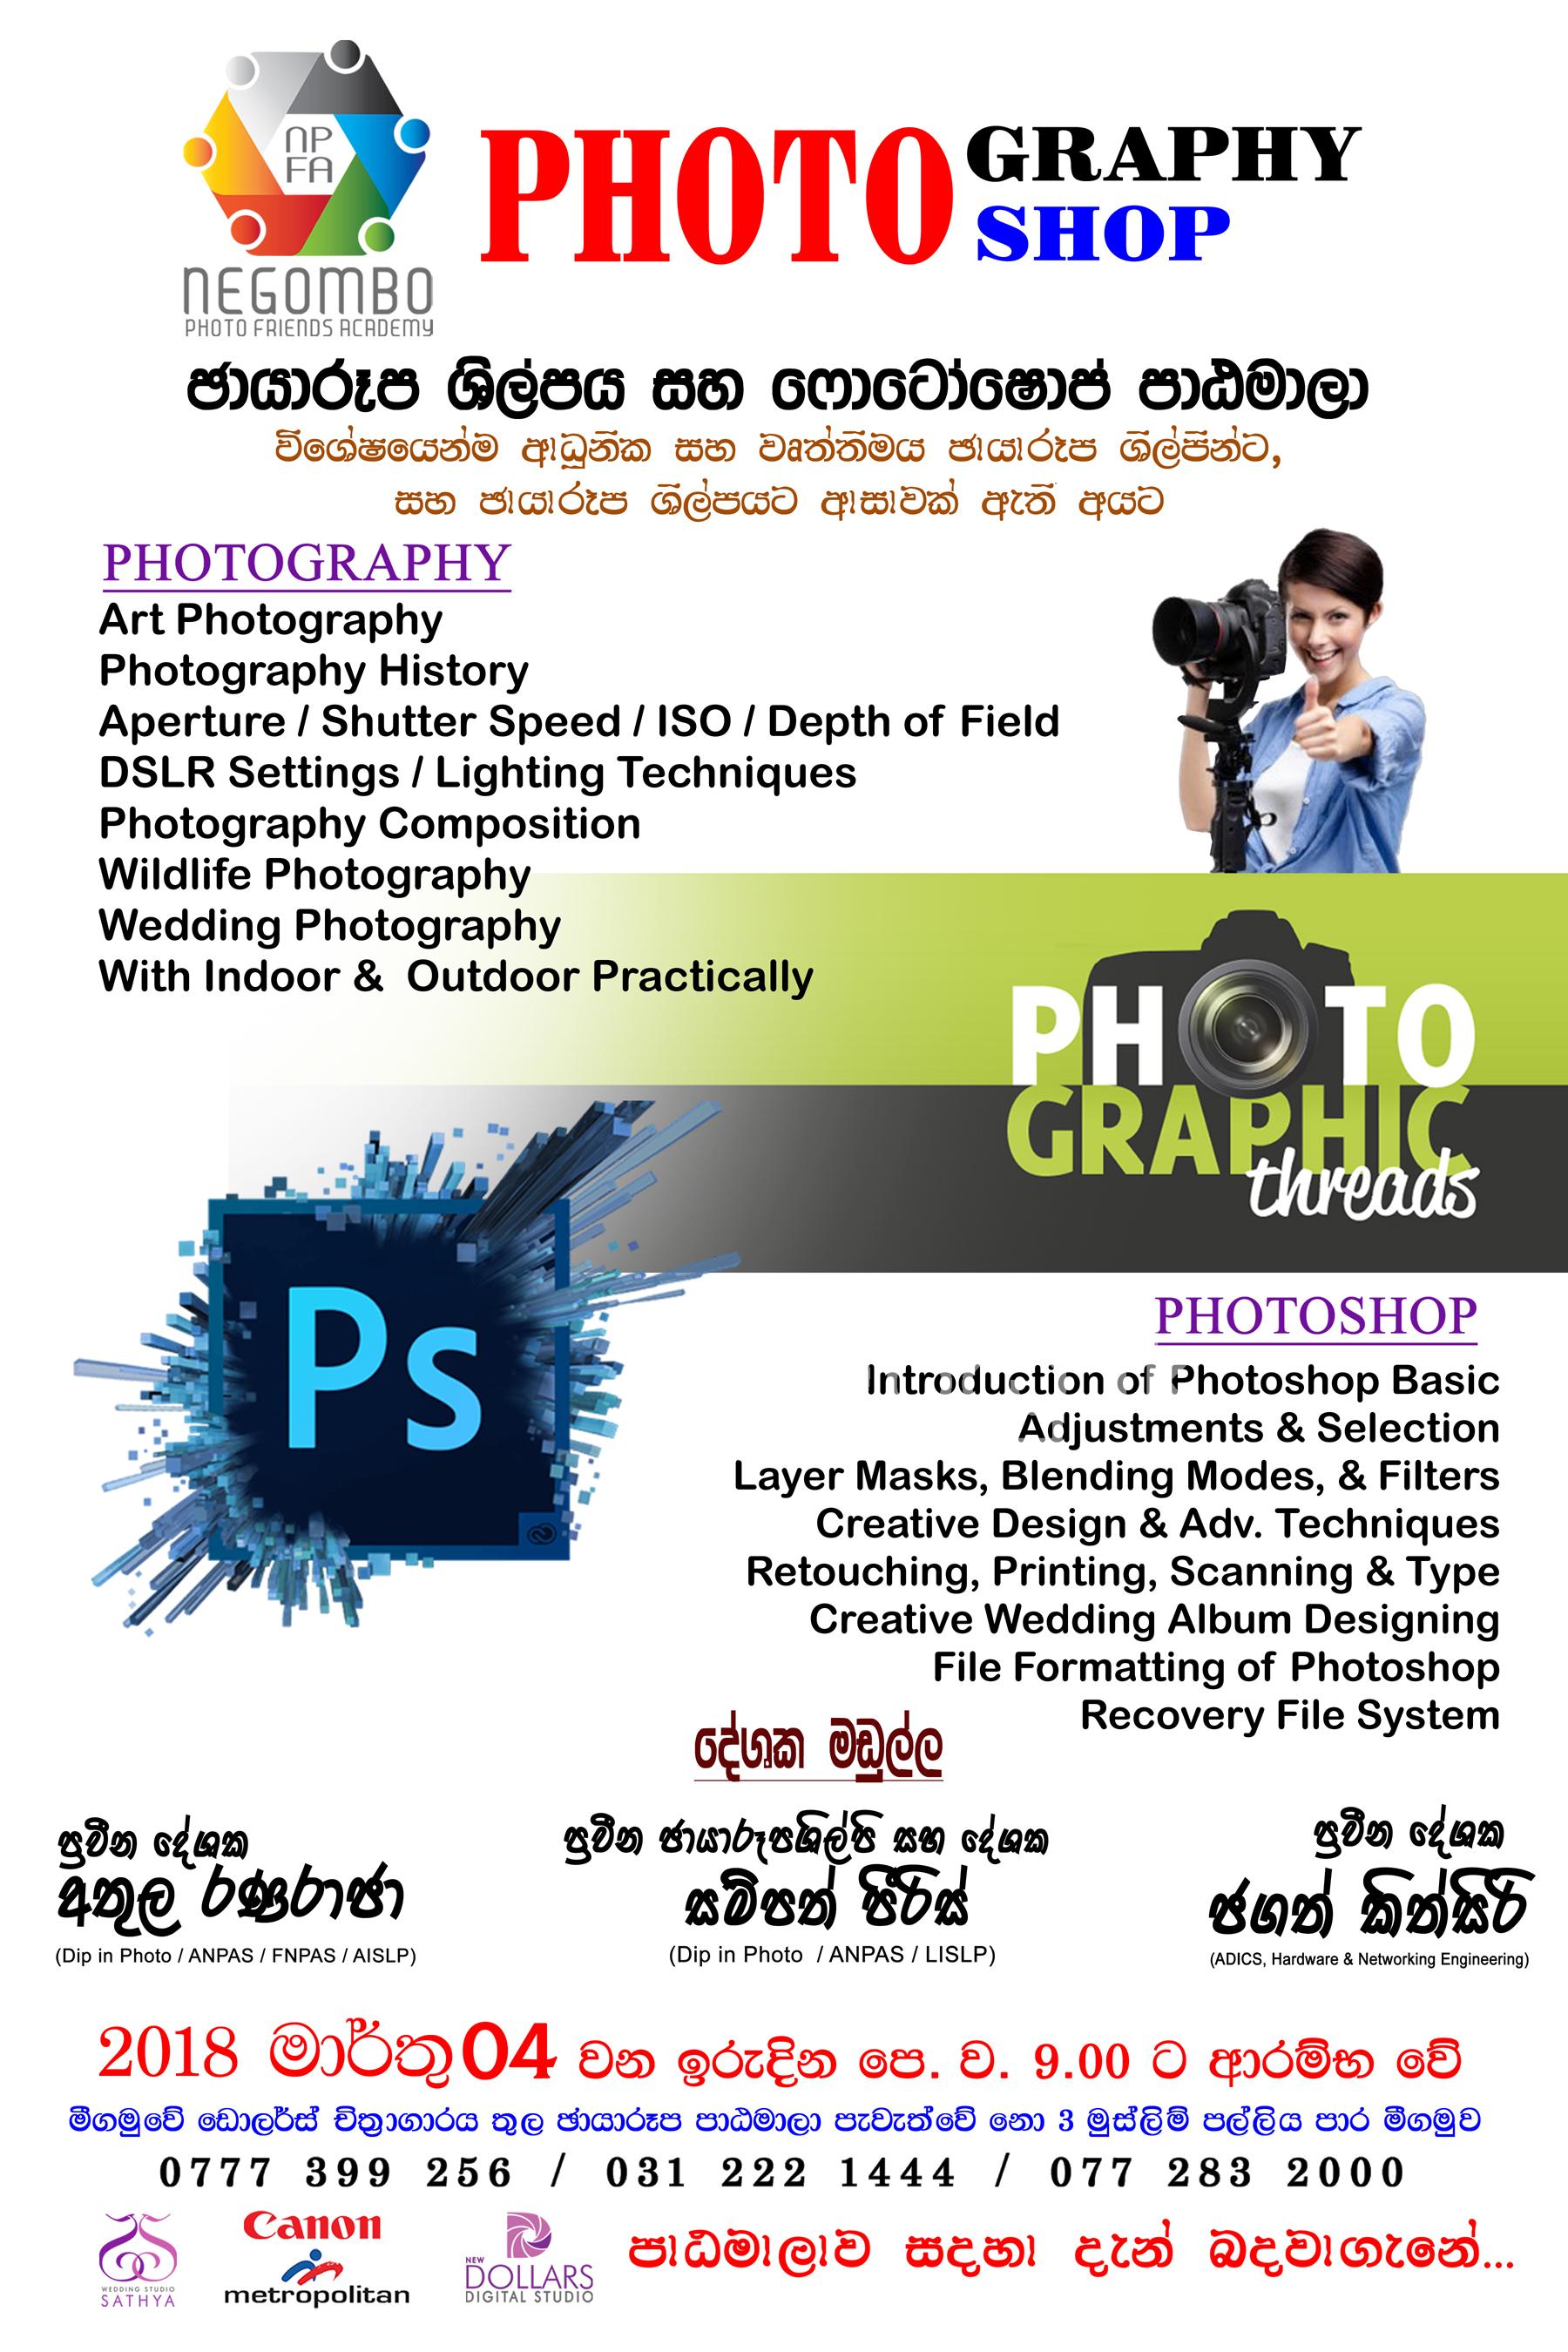 Photography & Photoshop Class Other Education in Negombo